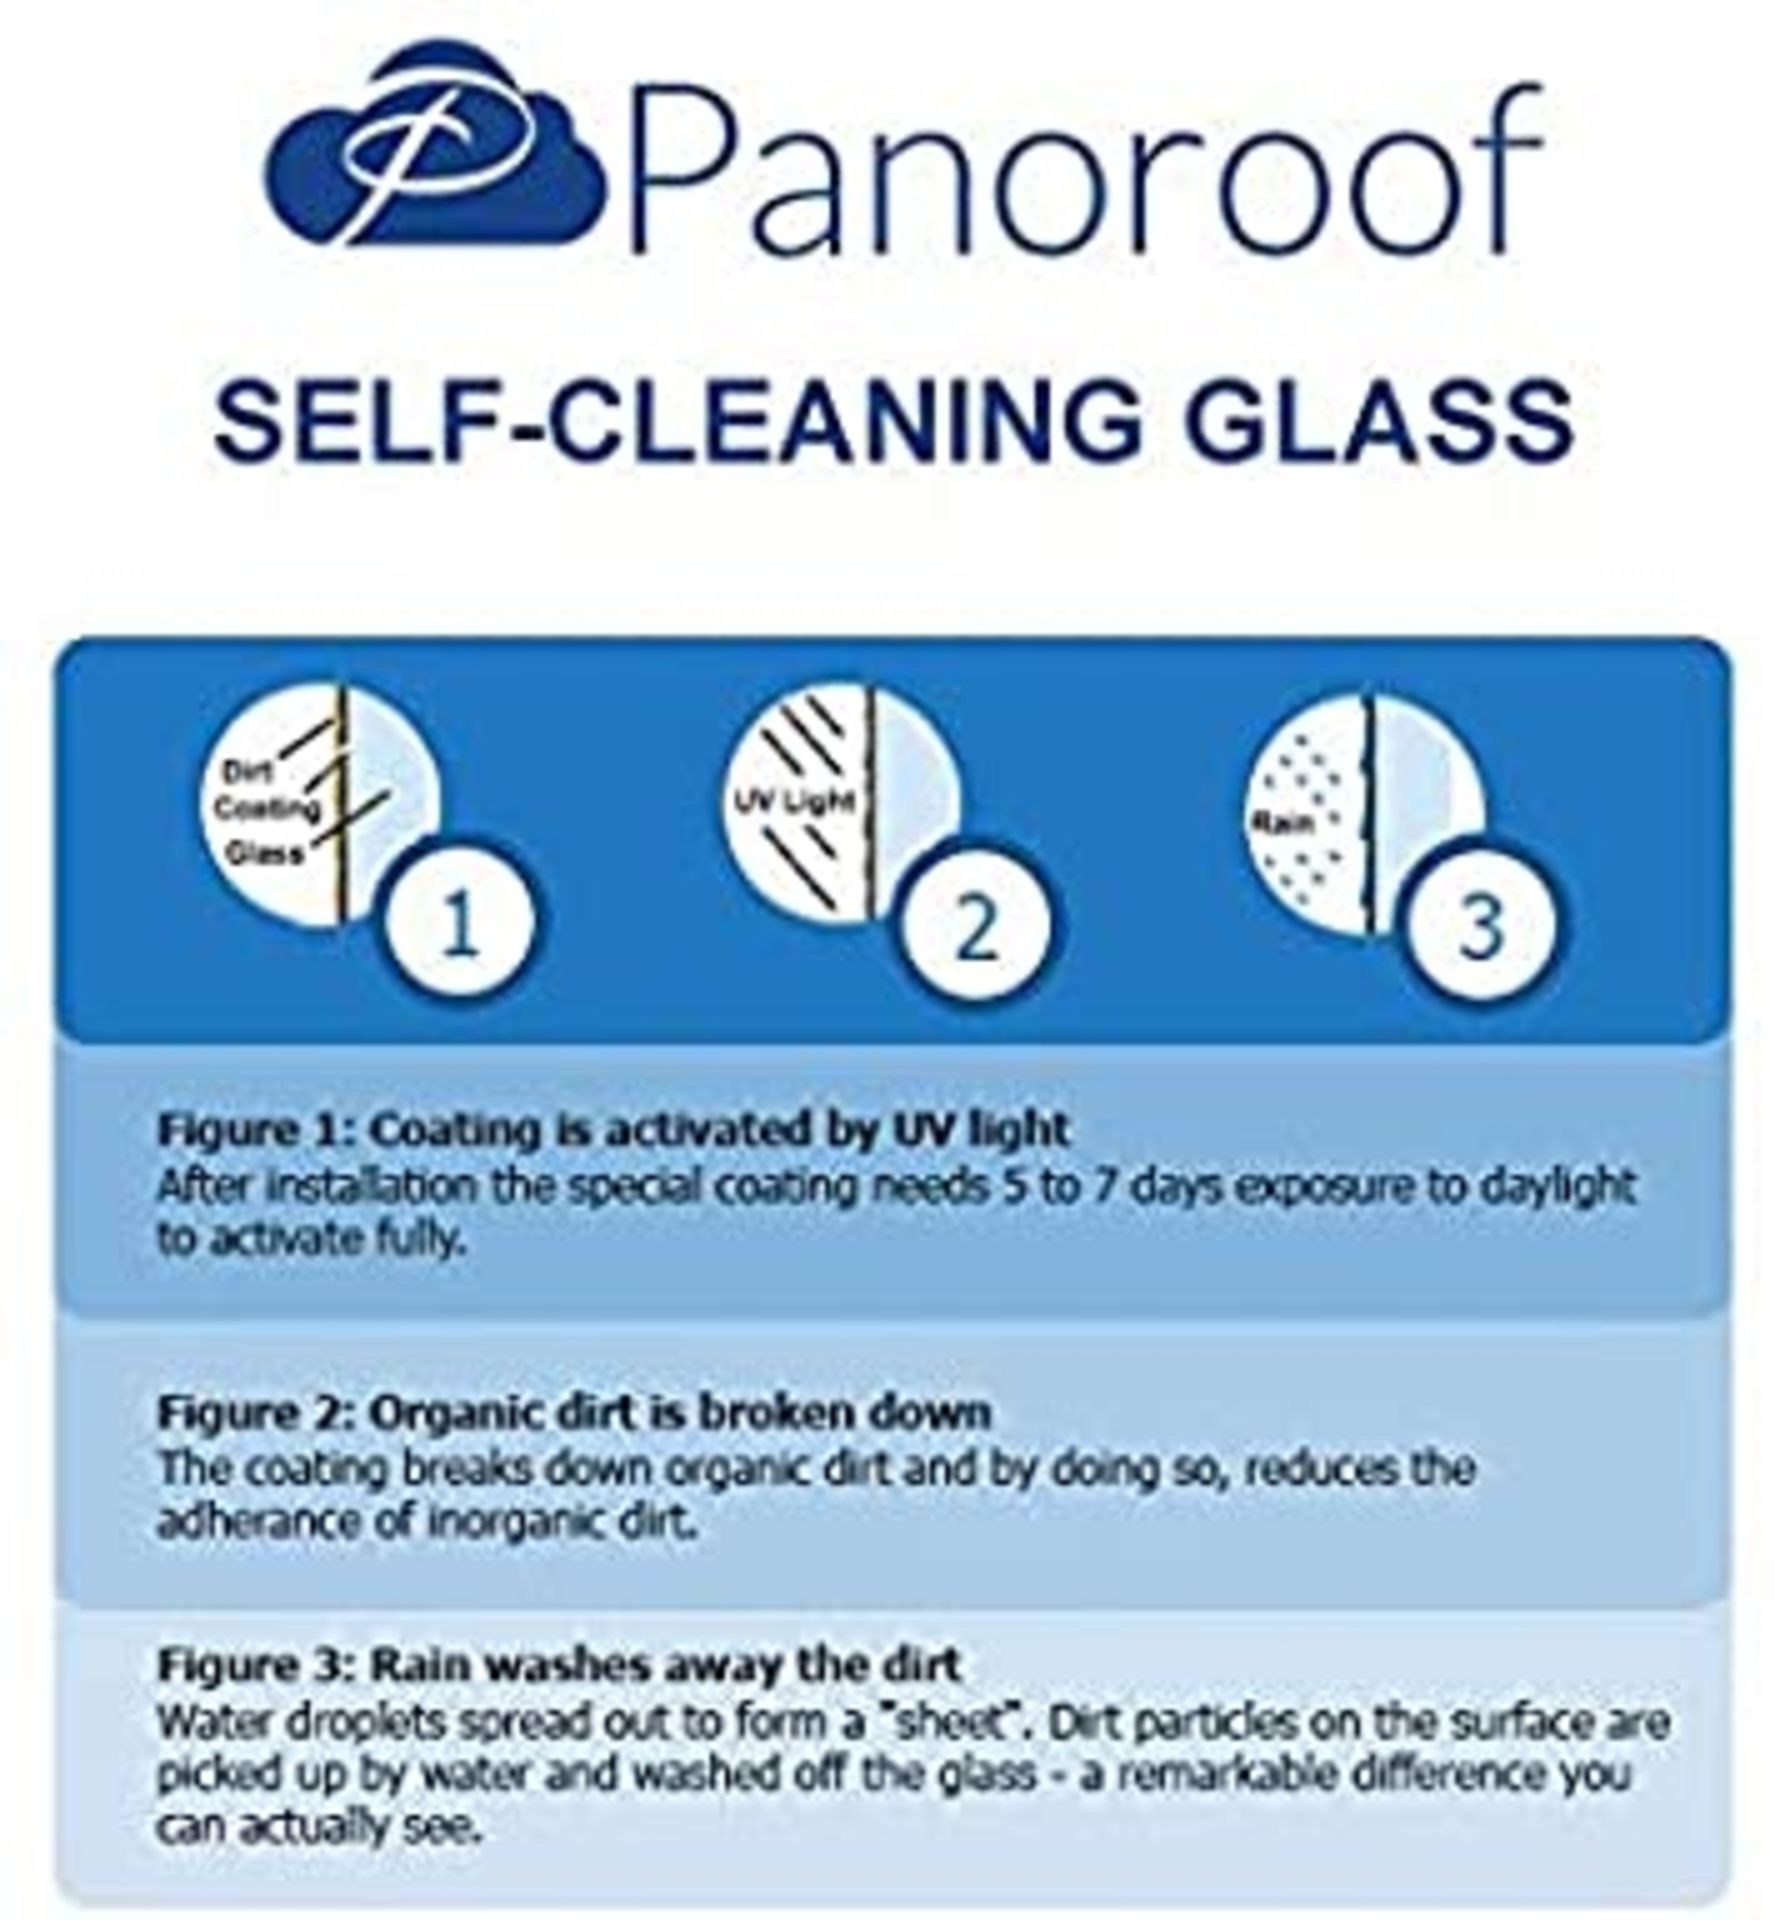 """Panoroof Triple Glazed Self Cleaning 400x400mm (inside Size Visable glass area) Seamless Glass - Image 6 of 6